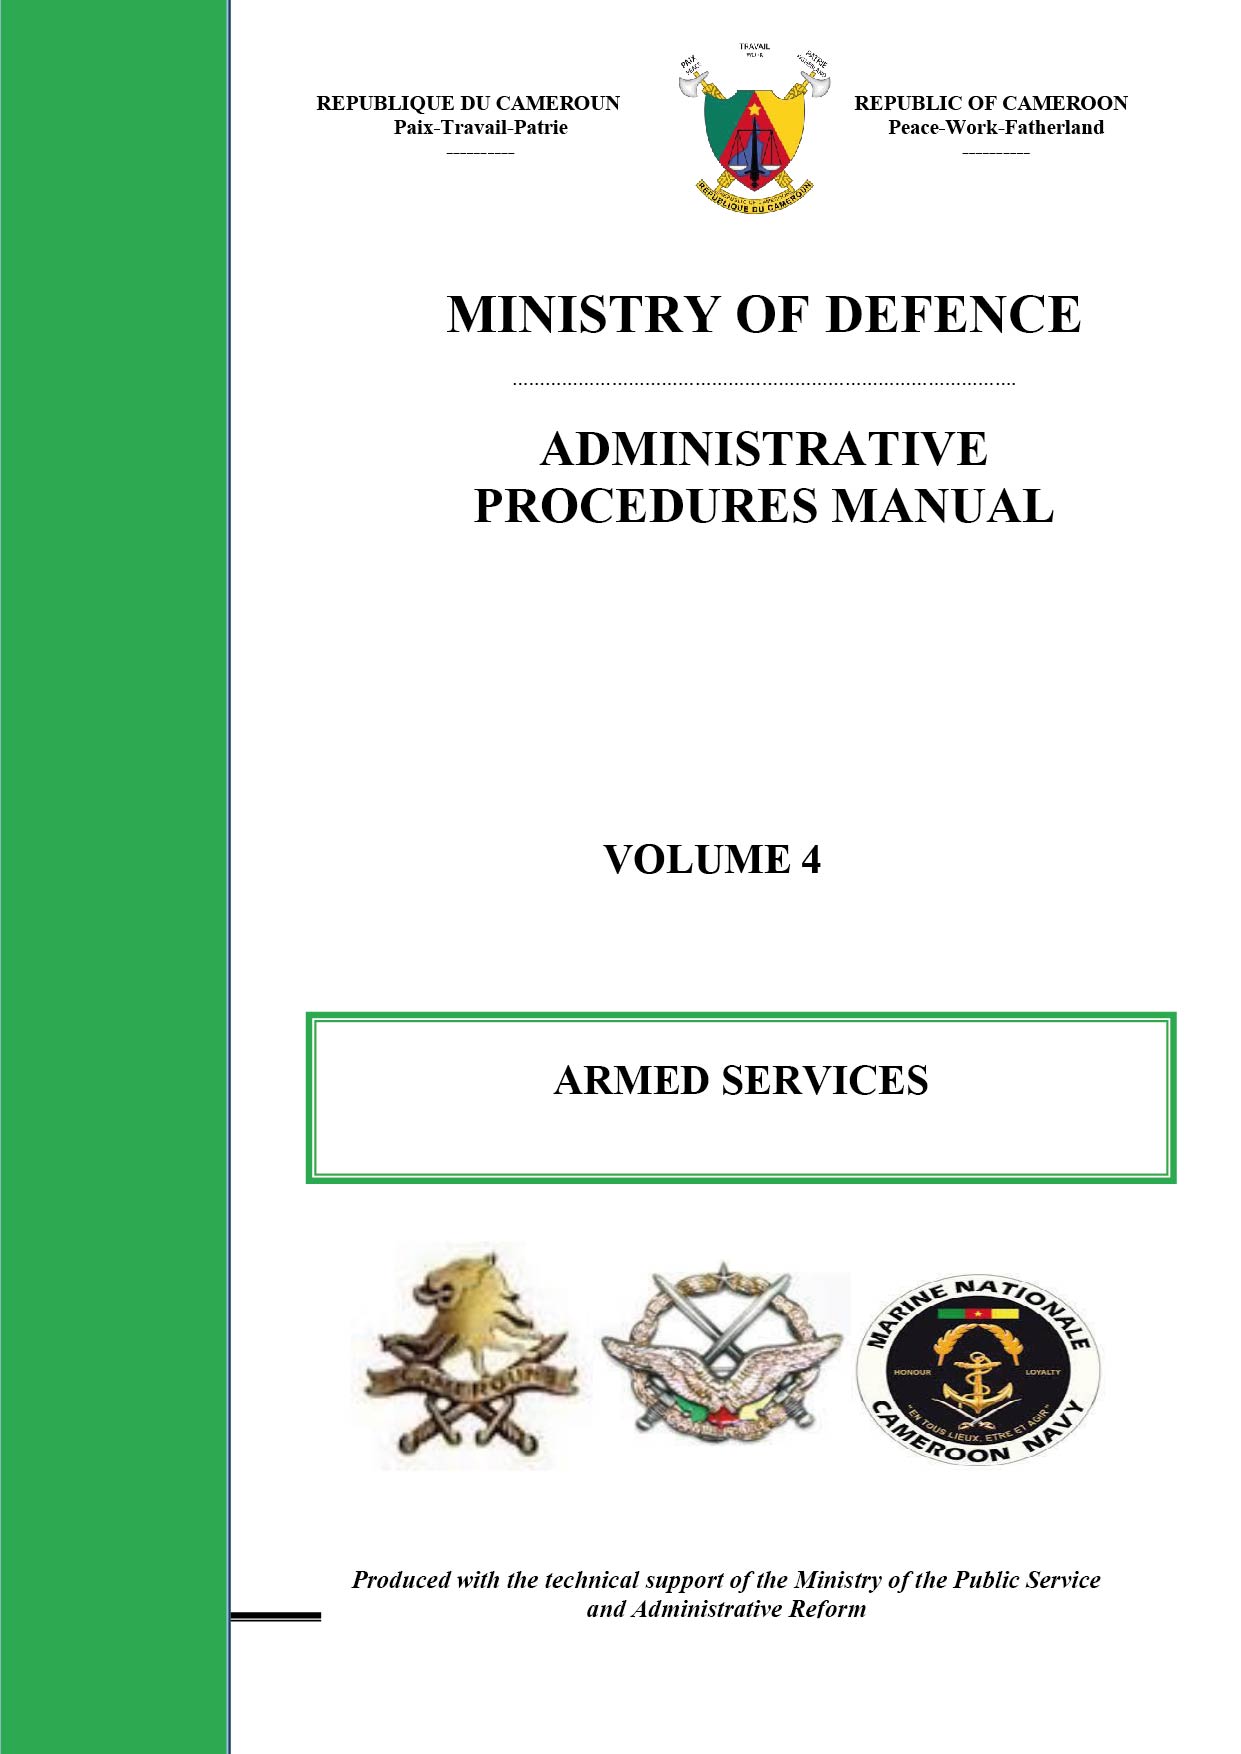 ADMINISTRATIVE PROCEDURES MANUAL ARMED SERVICES VOLUME 4